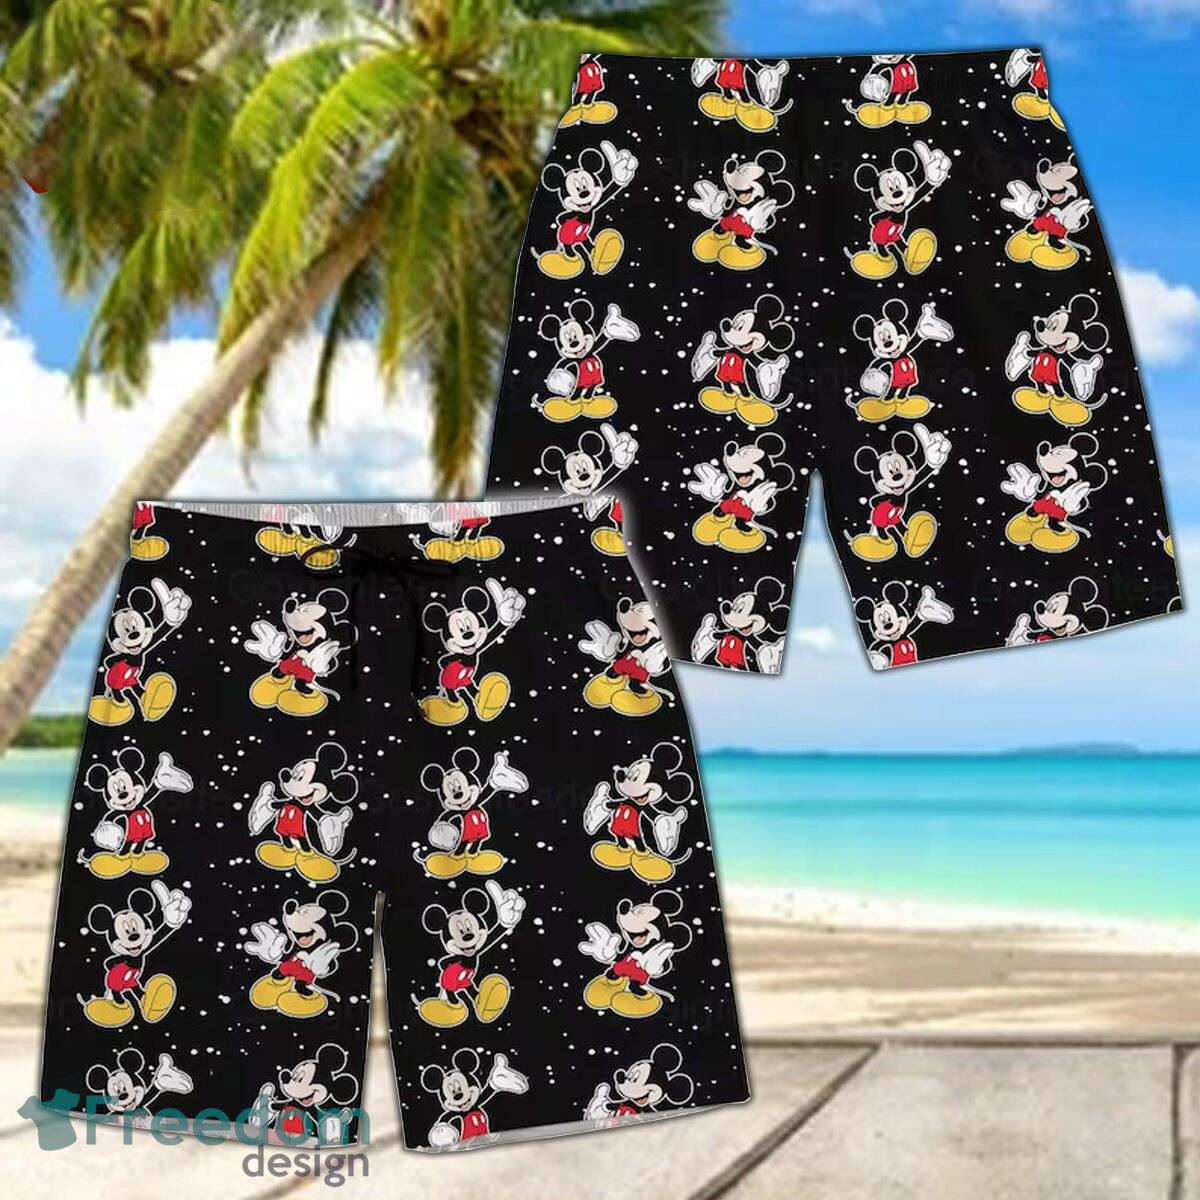 https://image.freedomdesignstore.com/2023-06/mickey-mouse-3d-hawaiian-shirt-and-short-summer-gift-for-men-and-women-2.jpg